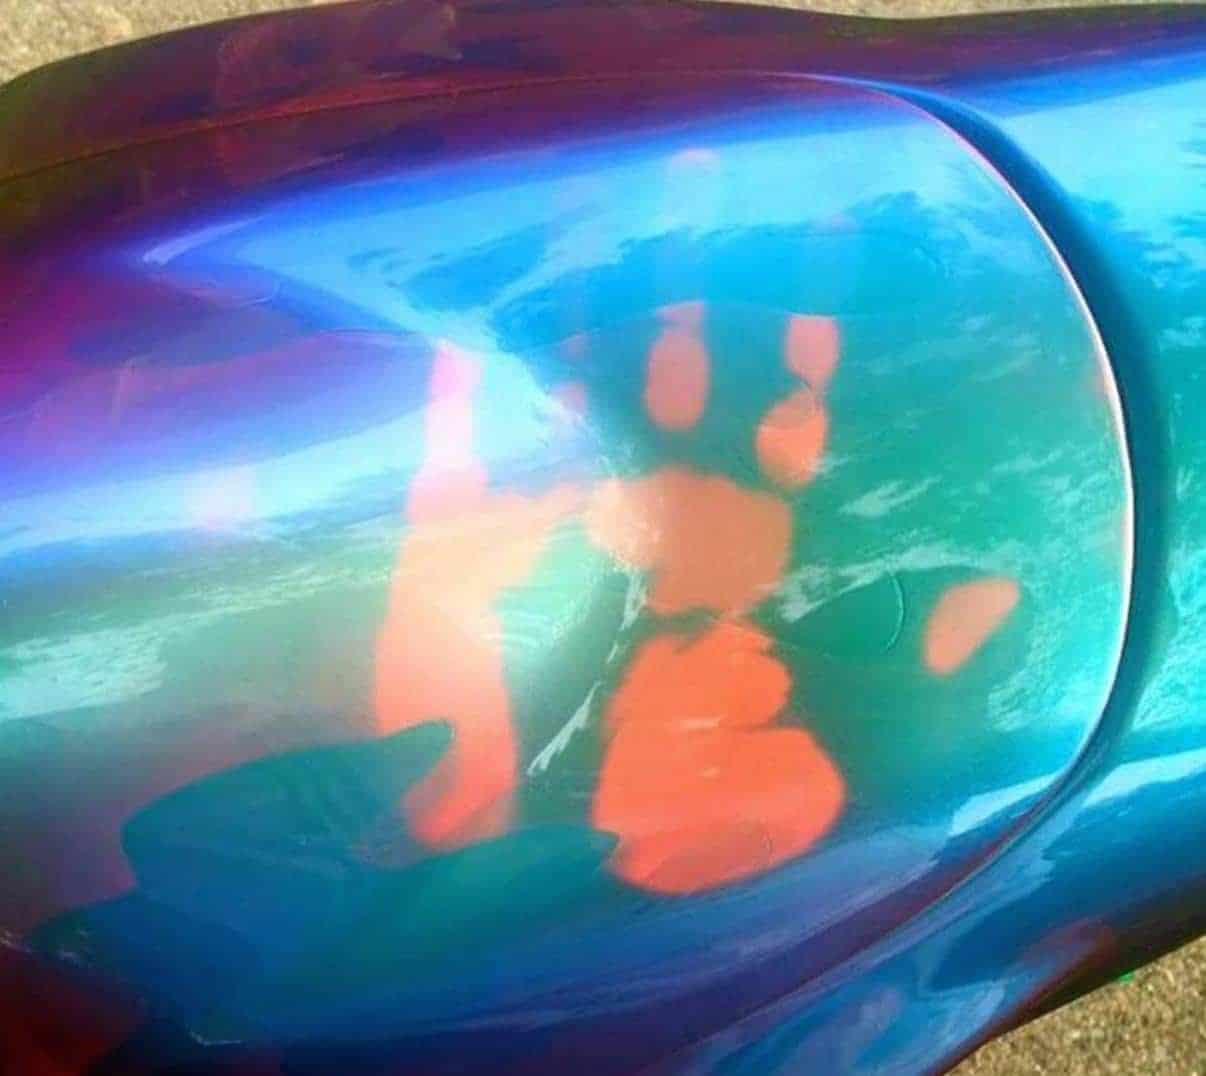 John Haro's handprint on his thermochromic paint covered motorcycle tank. Achieved by mixing black thermochromic paint pigment with any 79 or 59 series chameleon. Temperature changing chameleon paint!